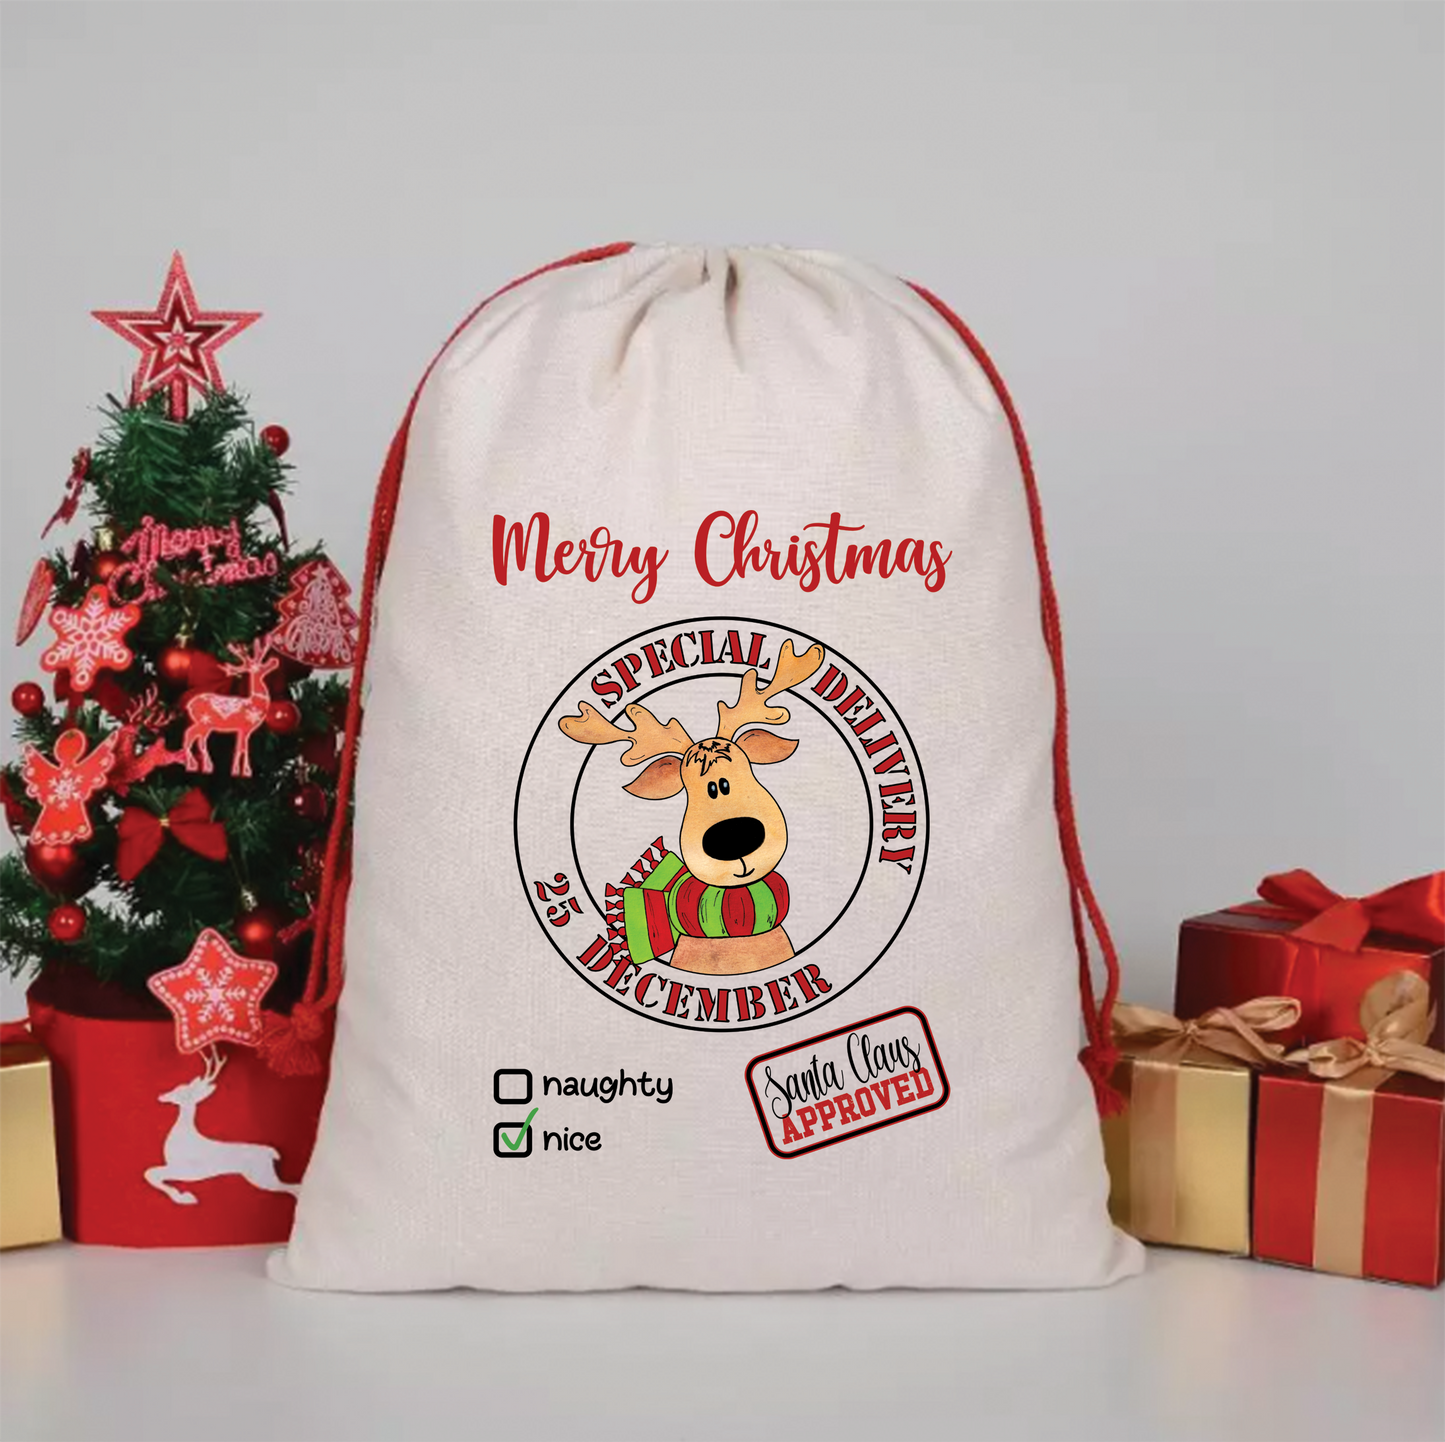 Special Delivery December 25th - Christmas Canvas Drawstring Bag